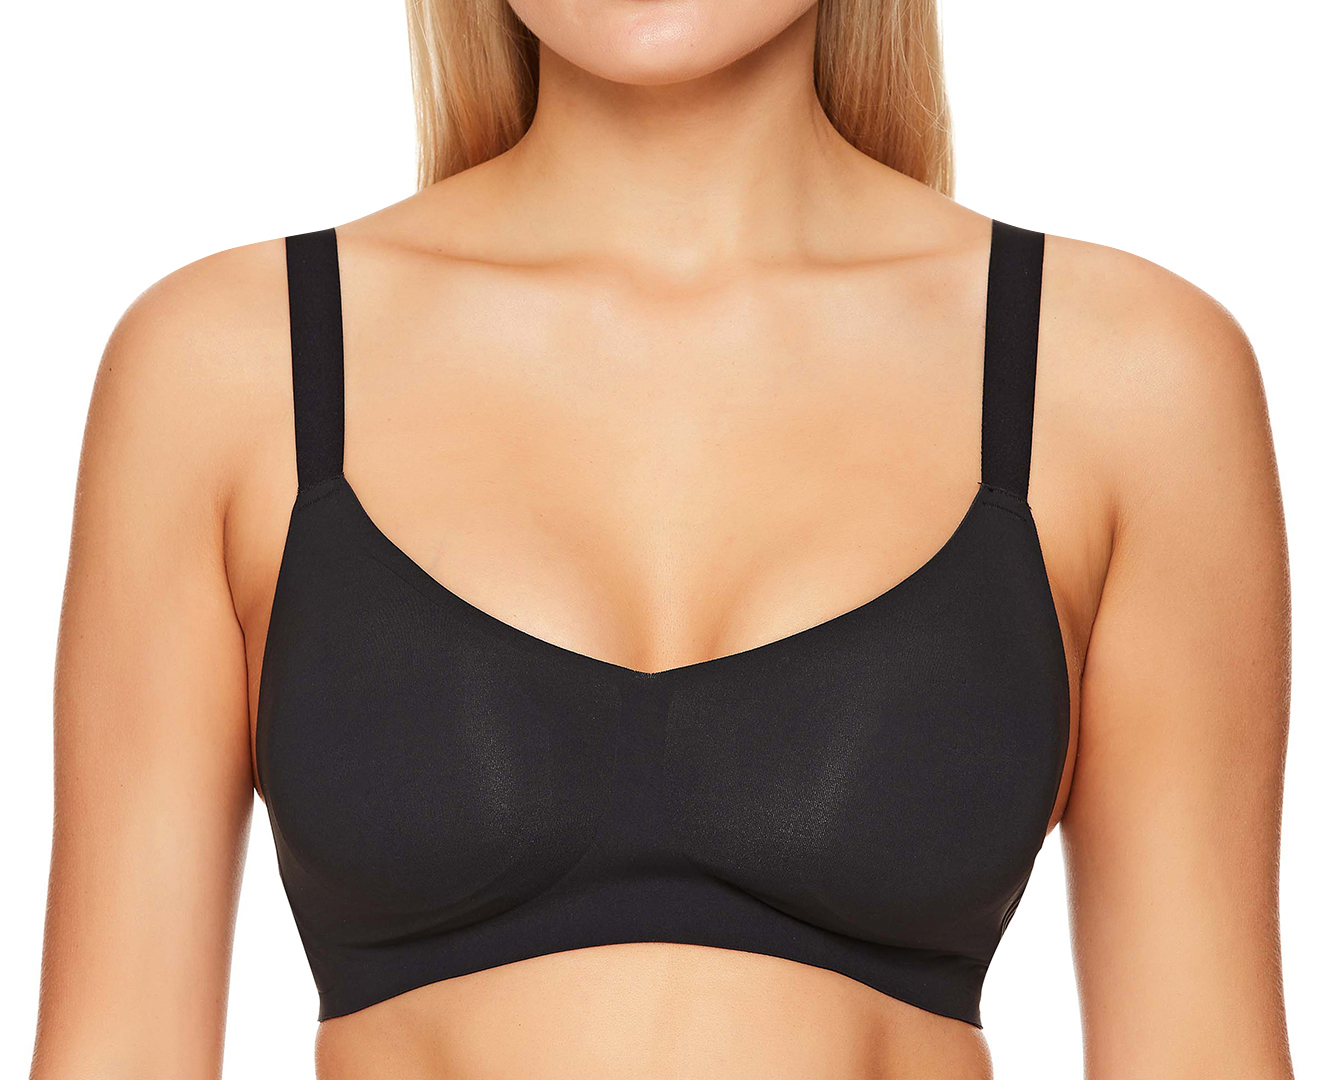 Bendon Women's Comfit Collection Wirefree Bra - Black